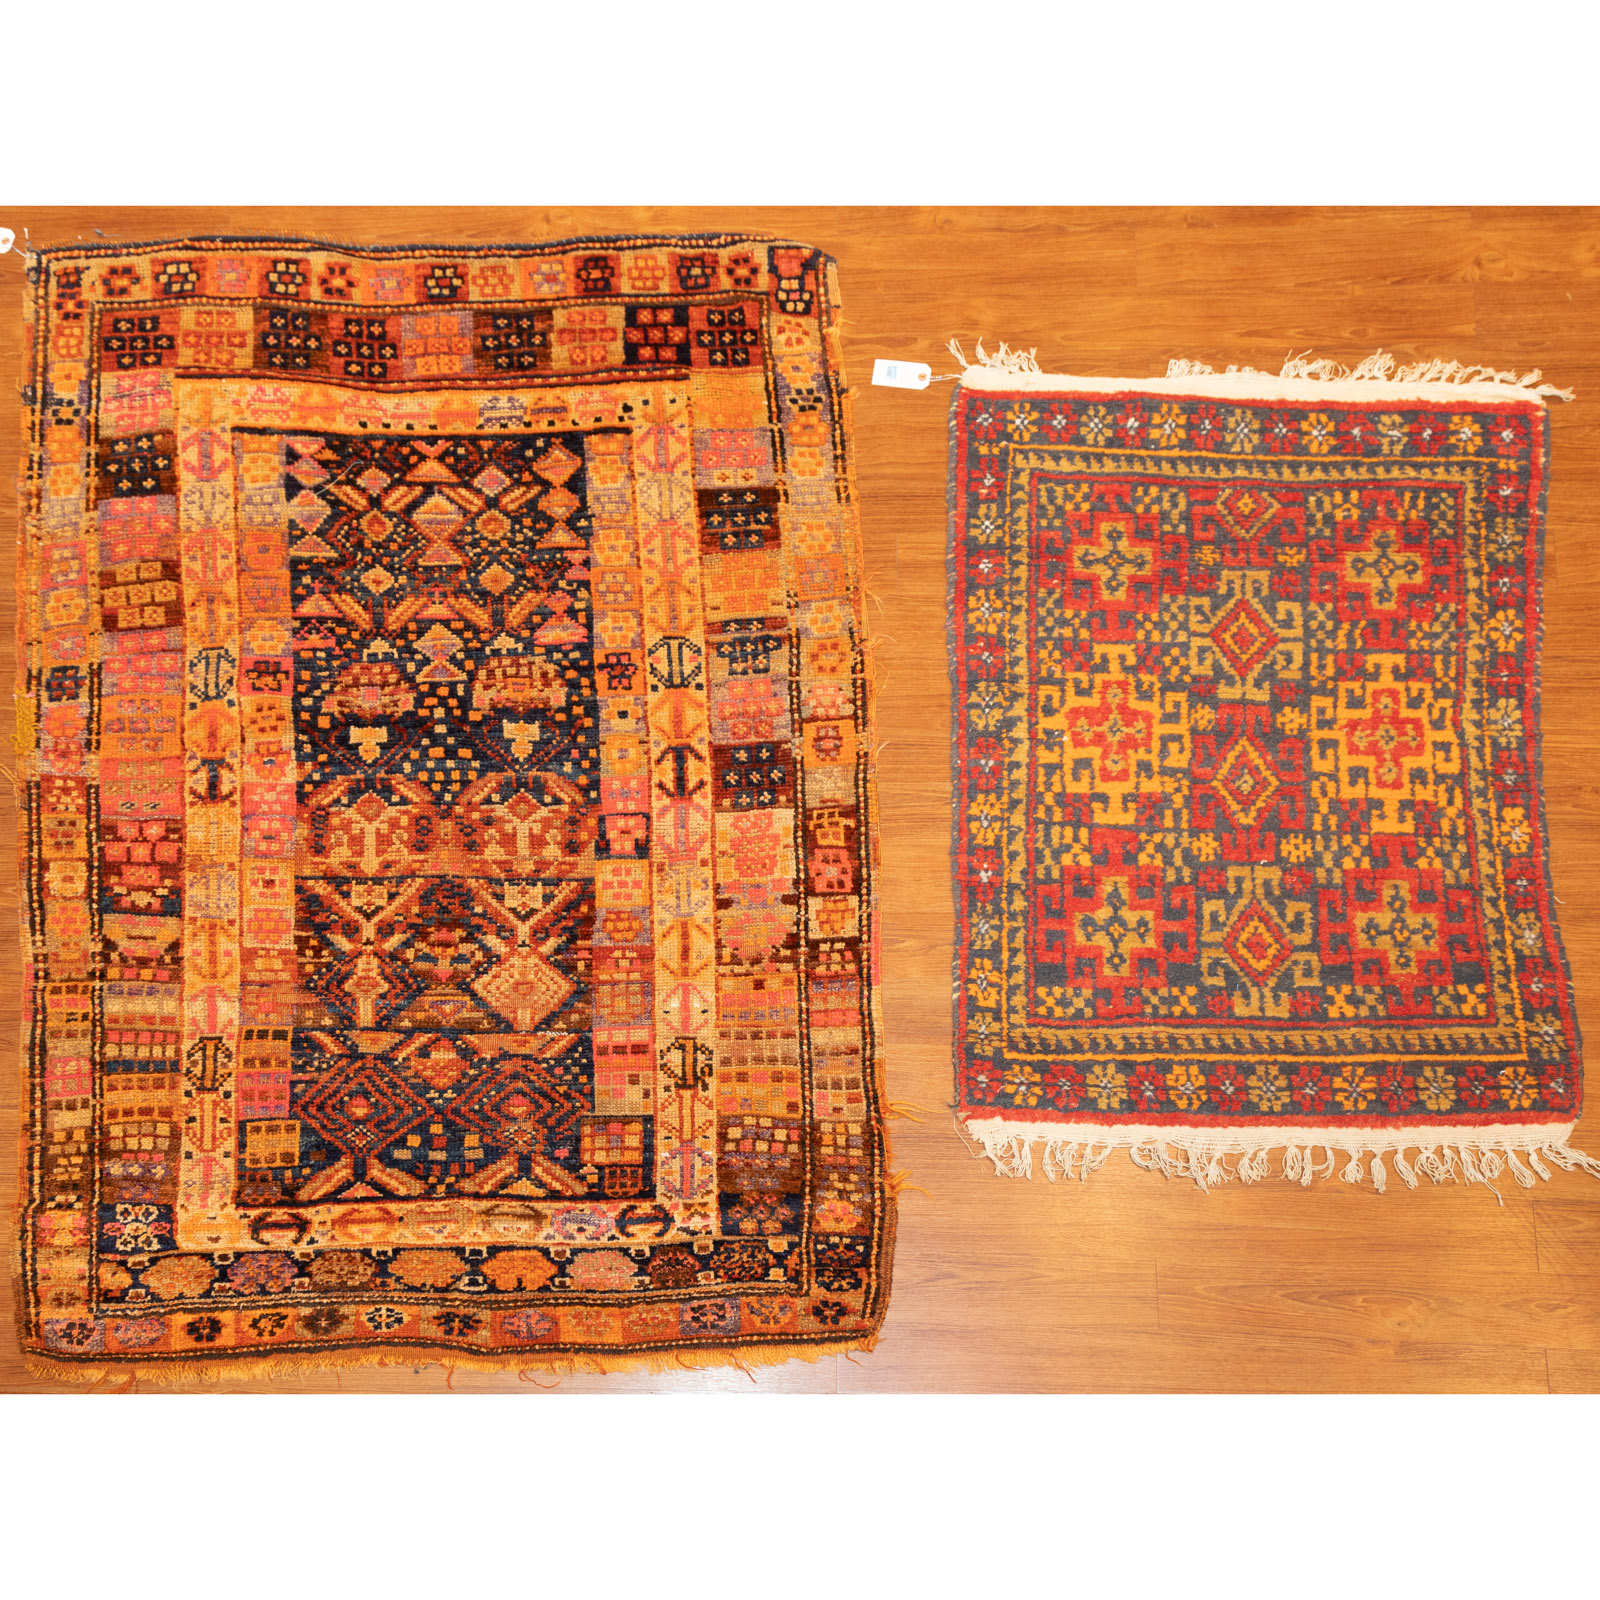 TWO TURKISH RUGS, 2.8 X 3.9 AND